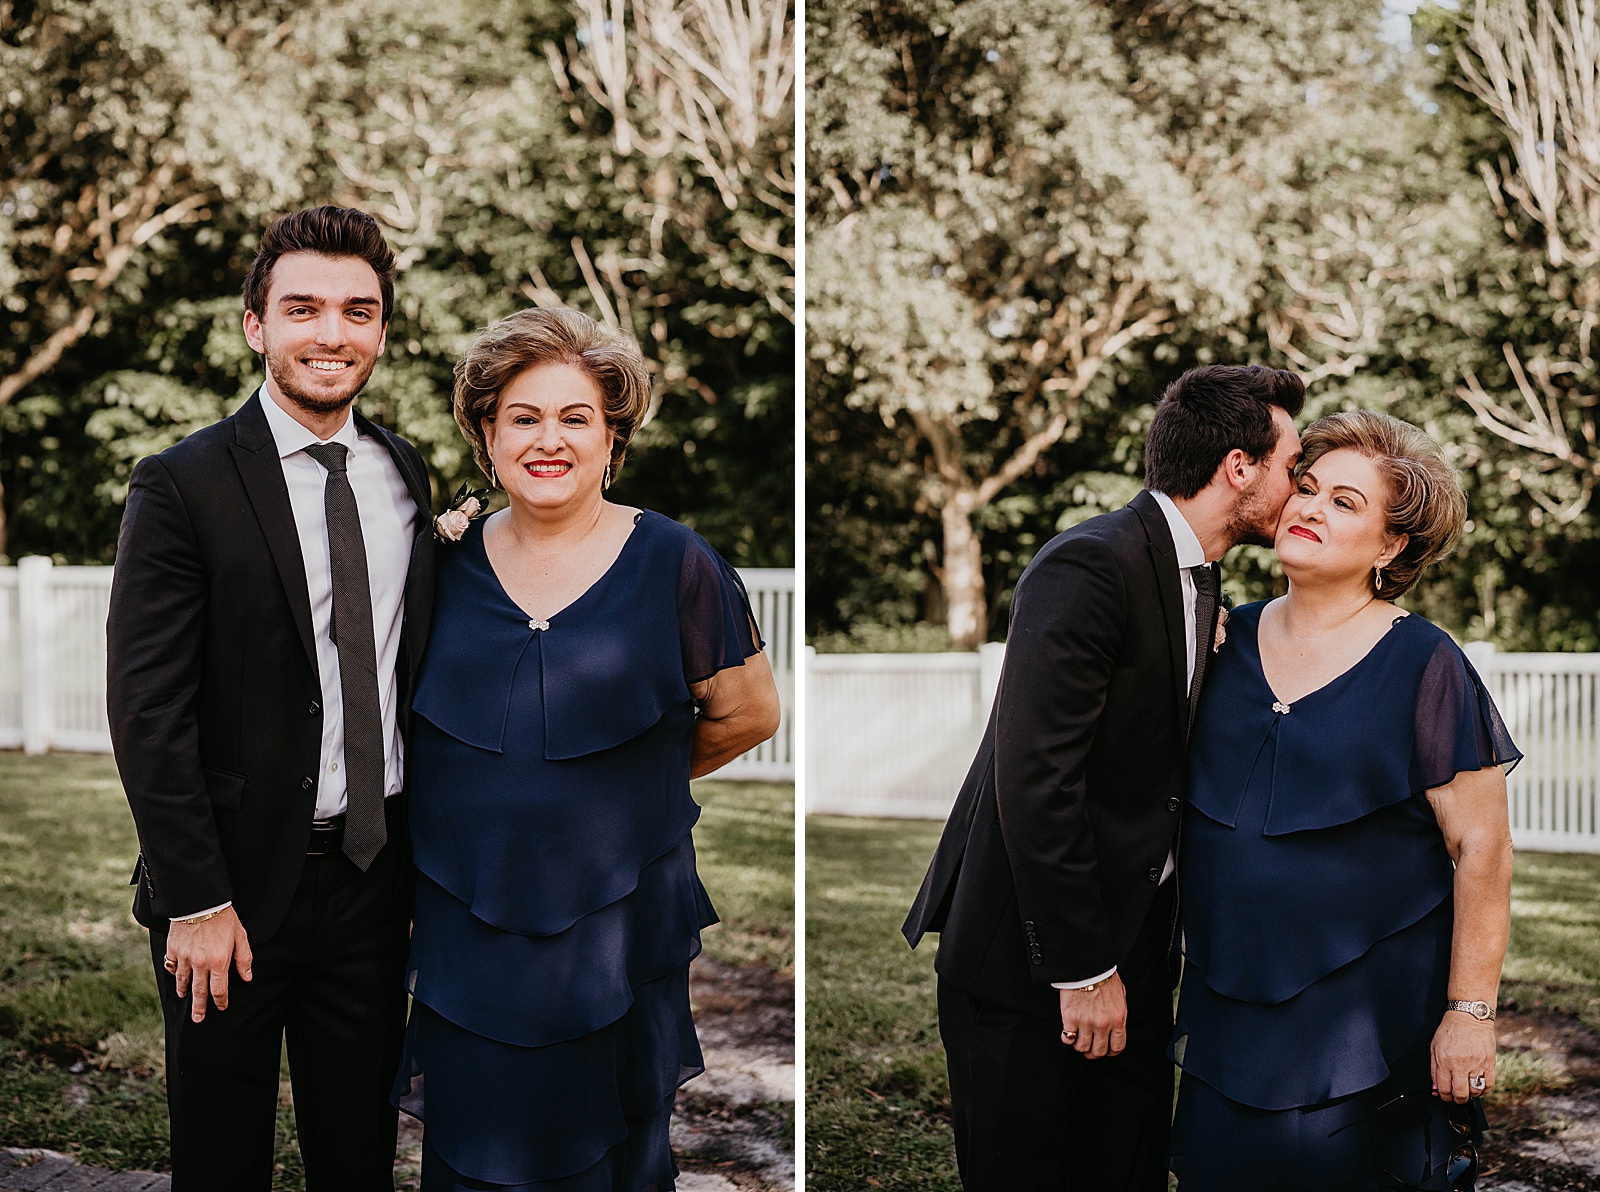 South Florida Backyard Elopement Photos by Krystal Capone Photography